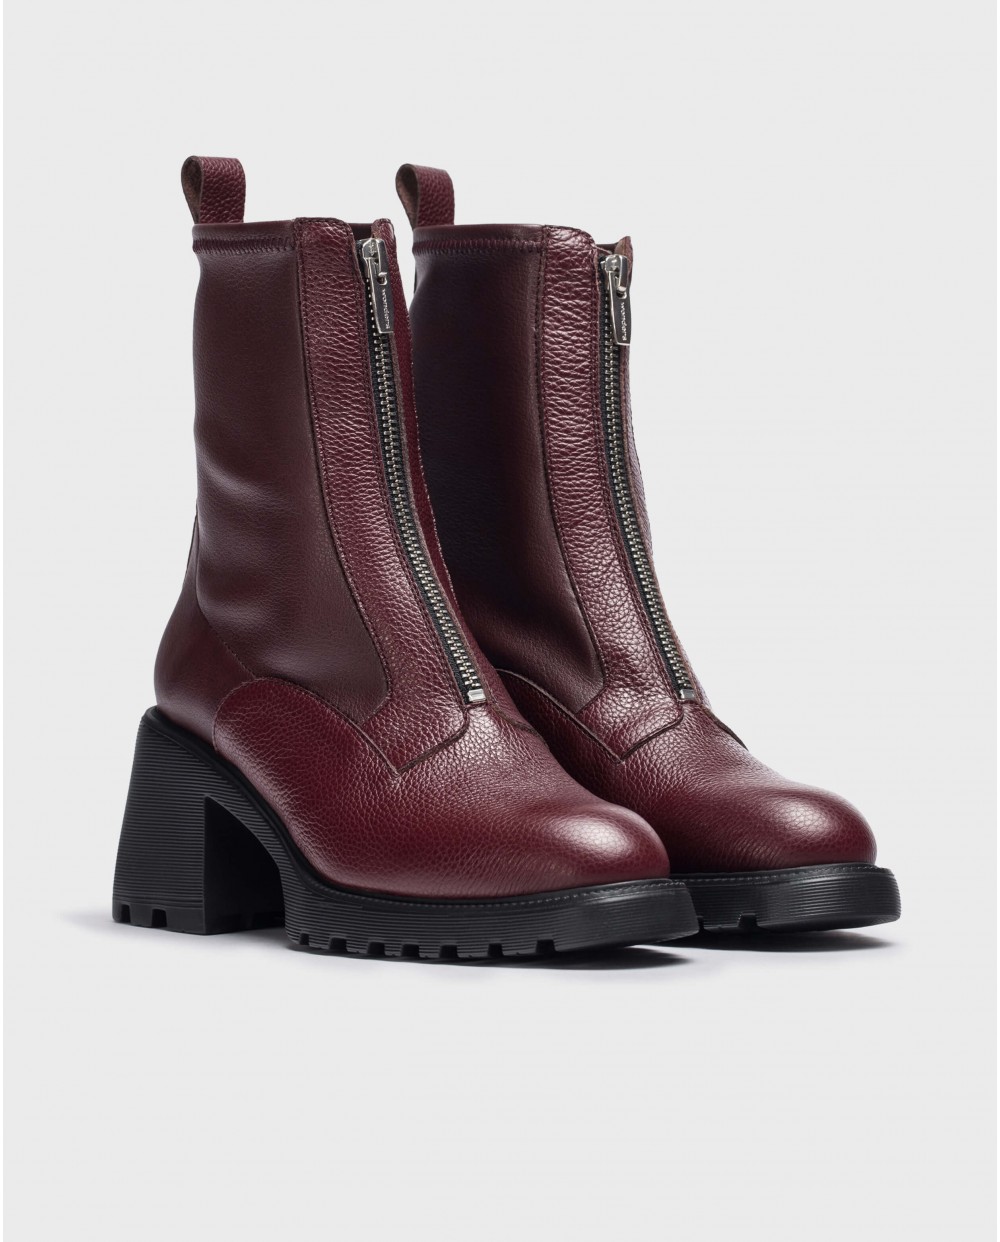 Wonders-Ankle Boots-Burgundy KID ankle boot